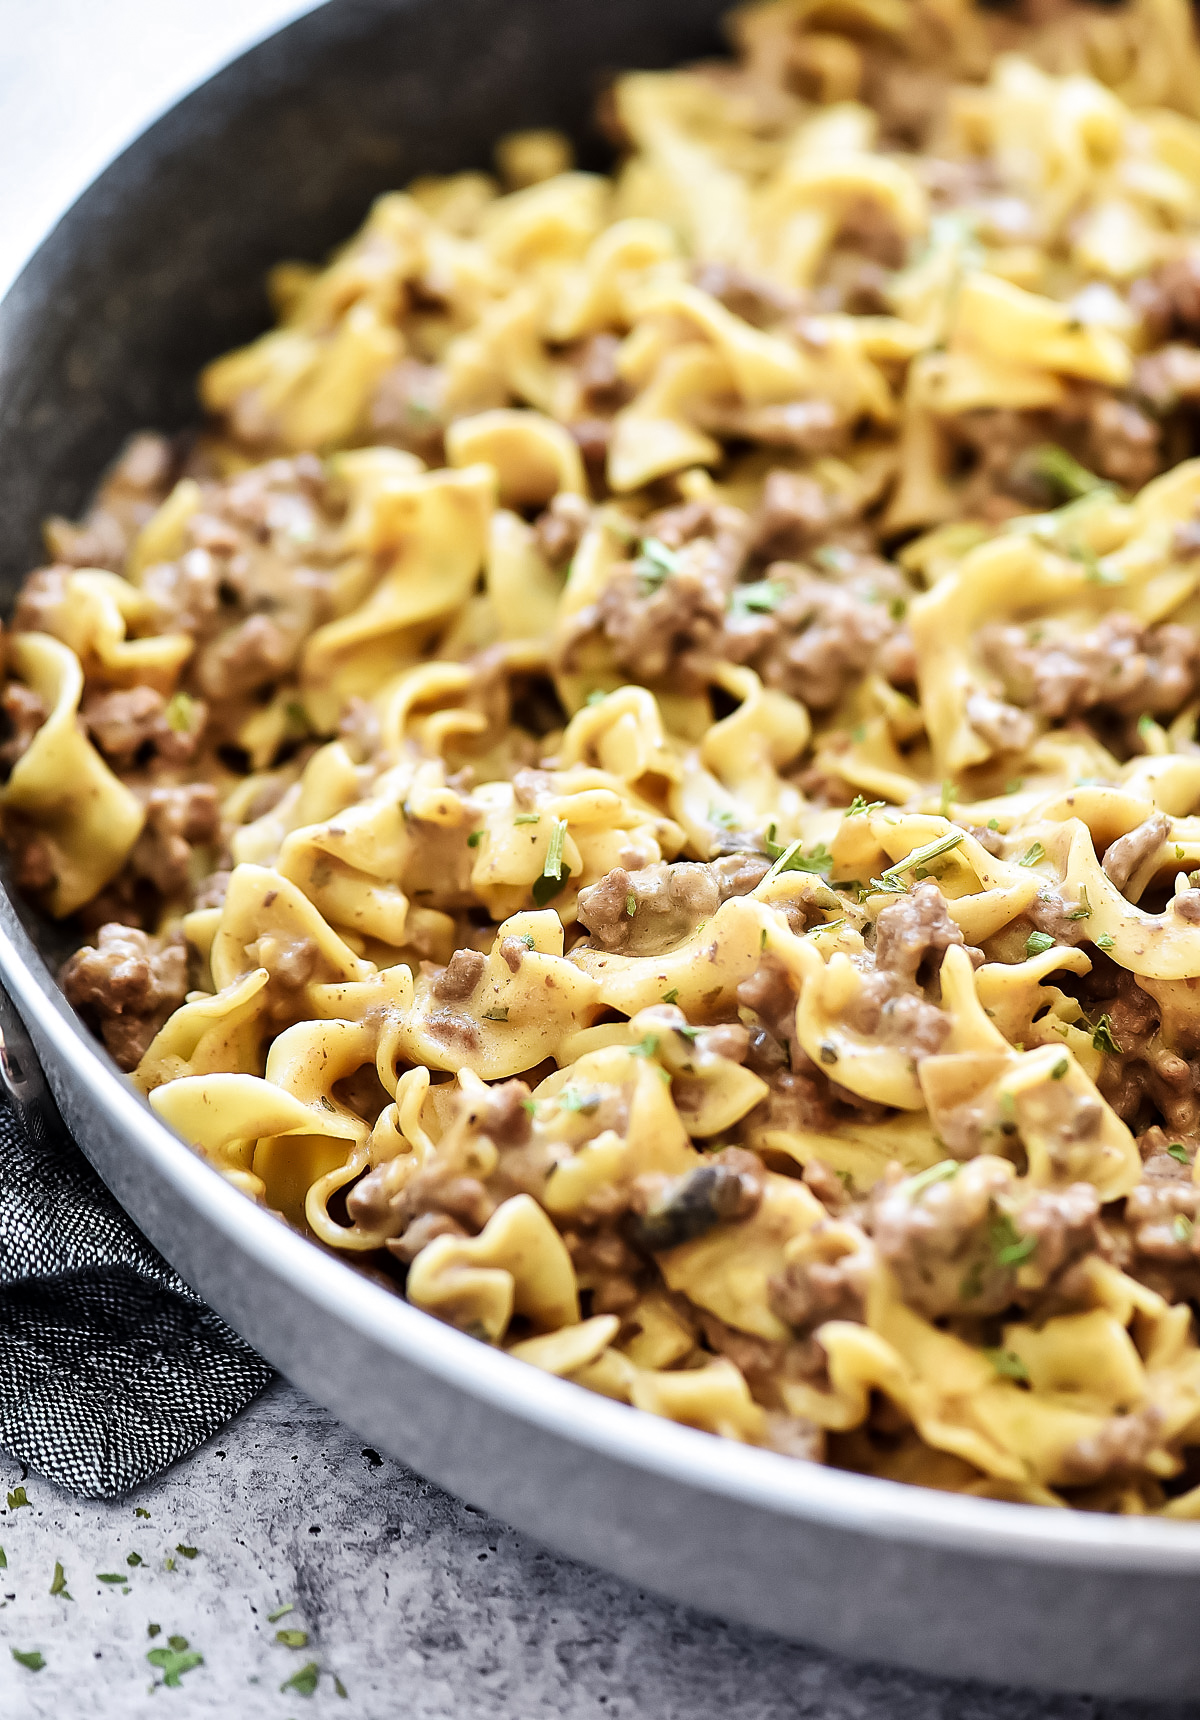 Easy Beef Stroganoff is filled with ground beef and a mushroom sauce served over egg noodles. Life-in-the-Lofthouse.com